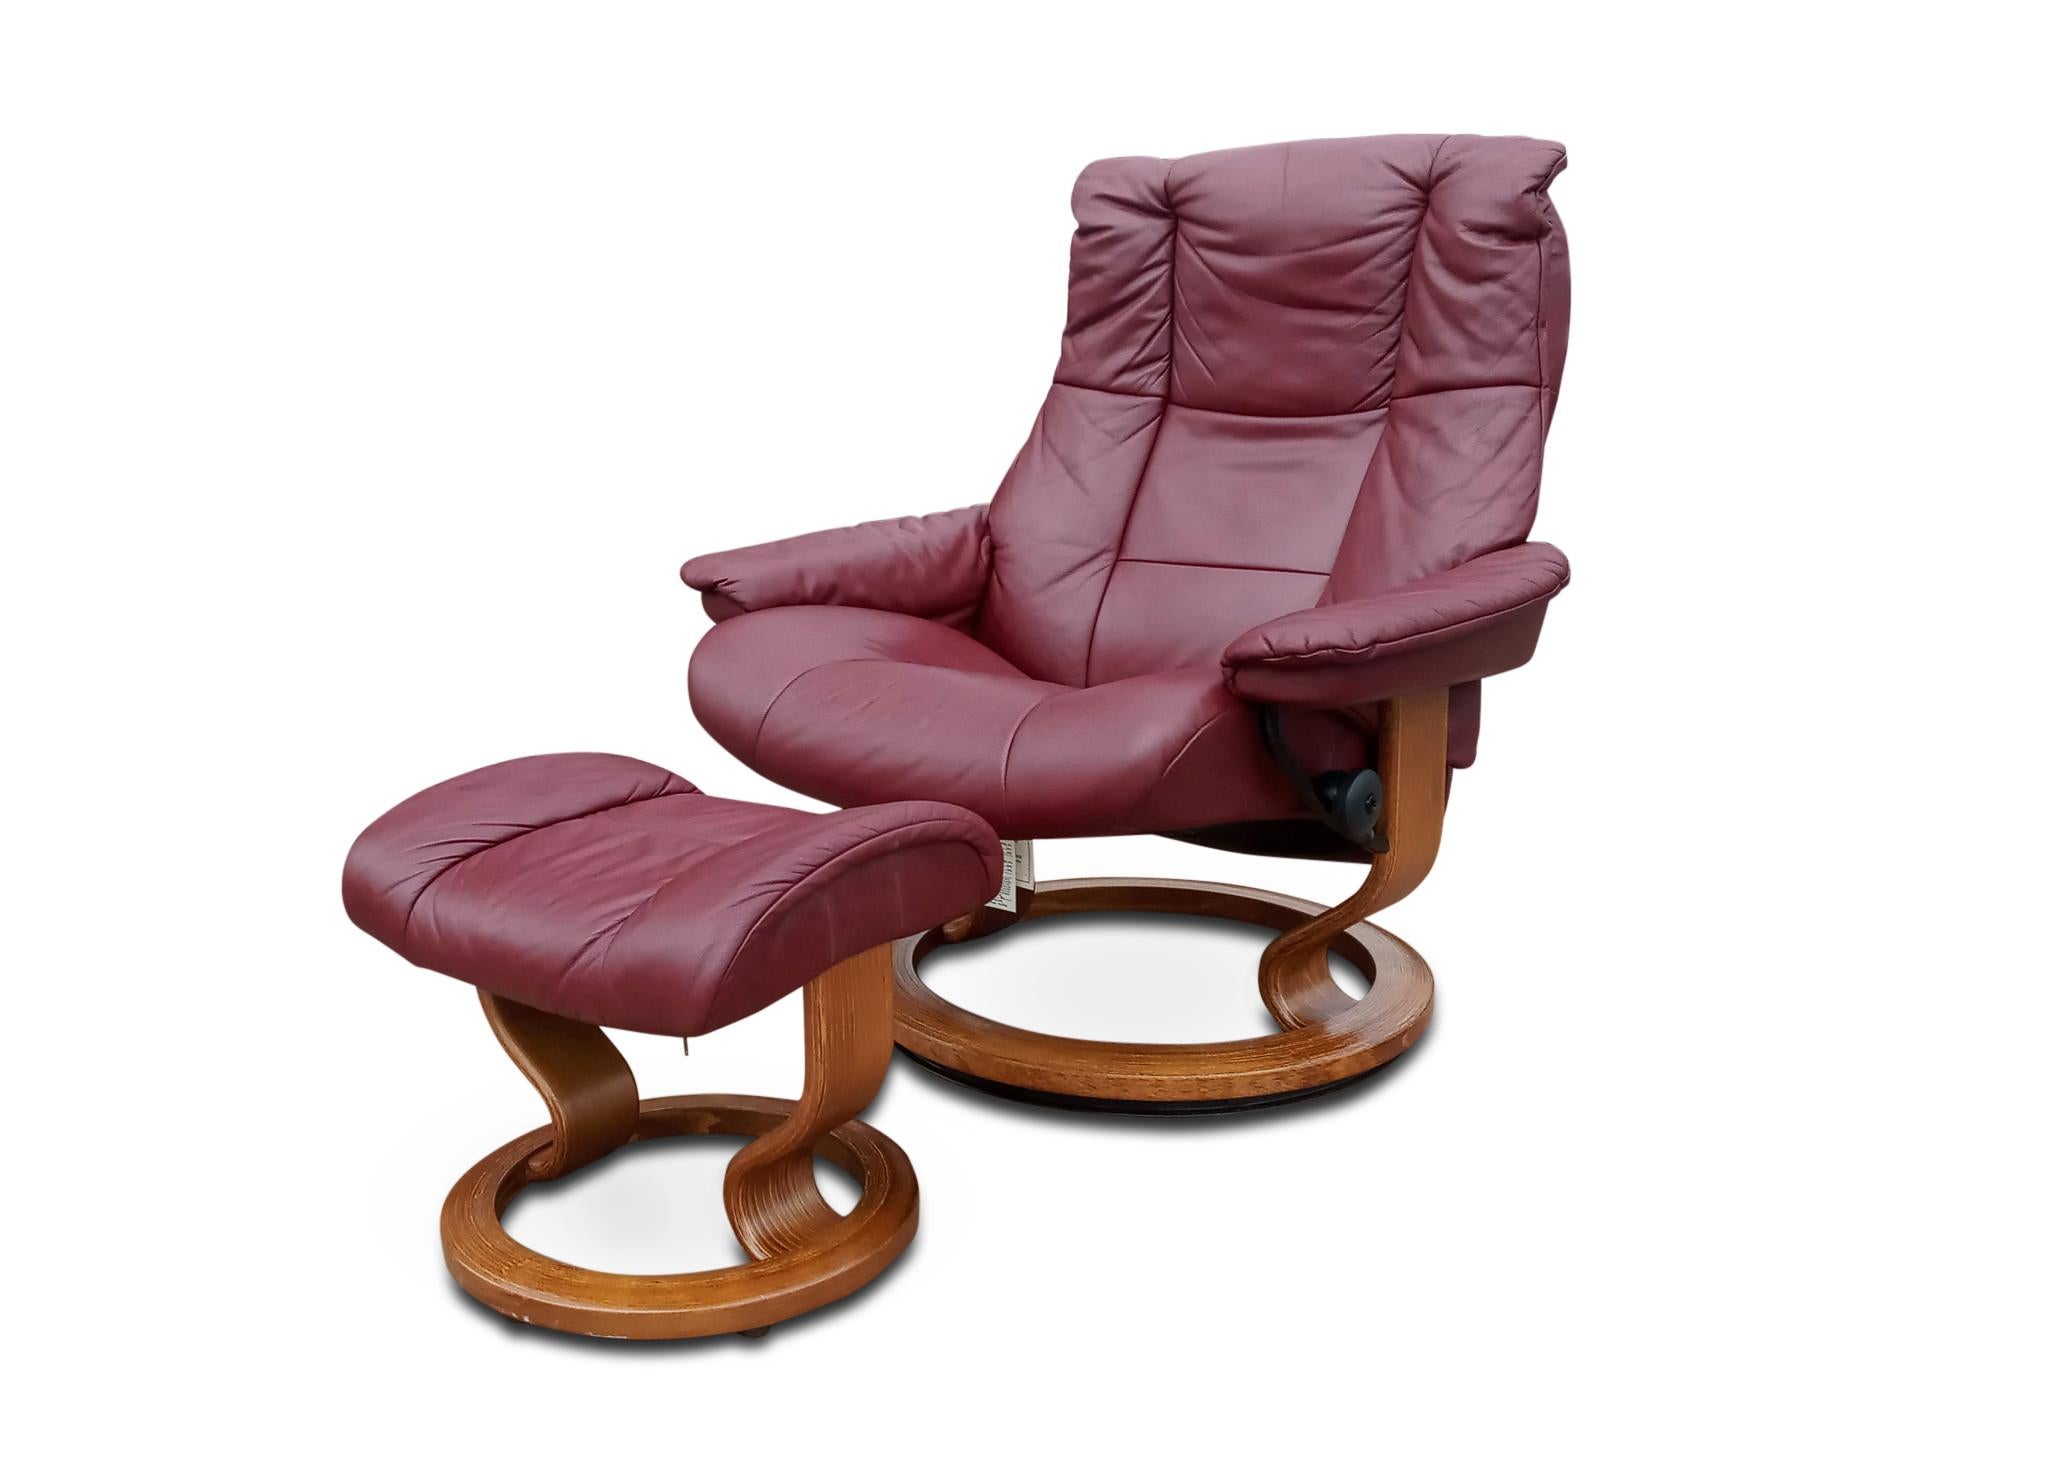 burgandy leather recliner